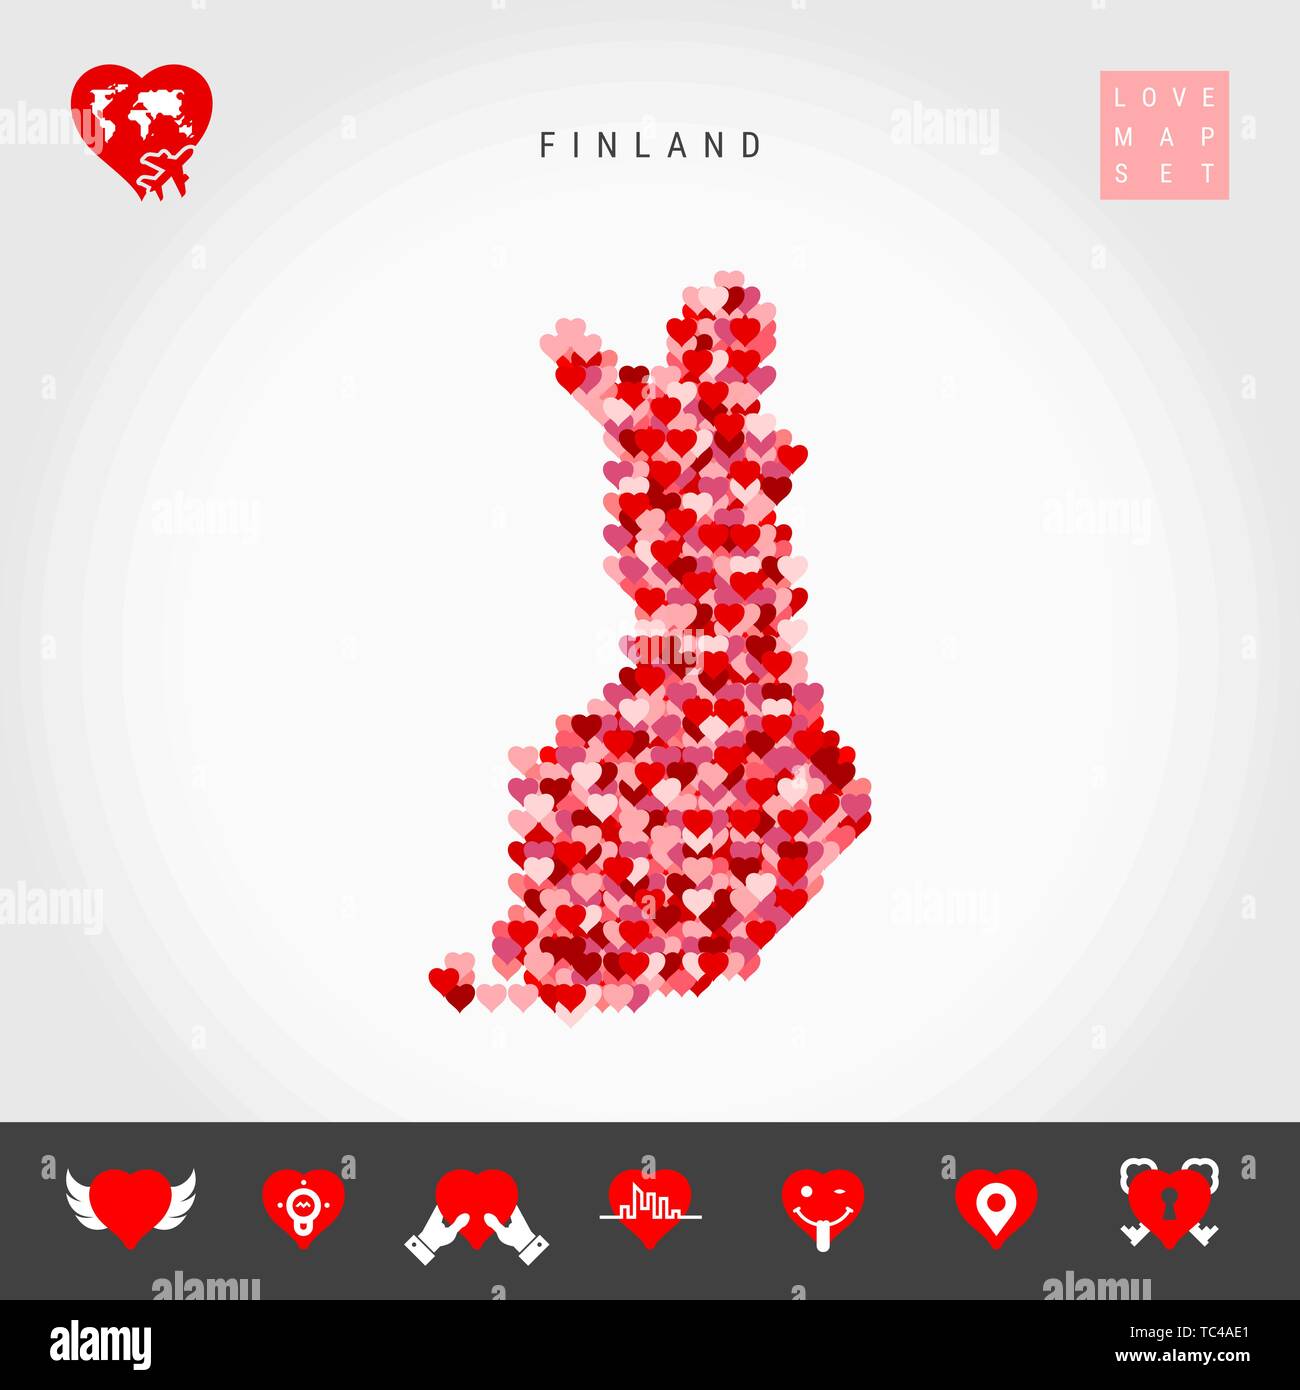 I Love Finland. Red and Pink Hearts Pattern Vector Map of Finland Isolated on Grey Background. Love Icon Set. Stock Vector